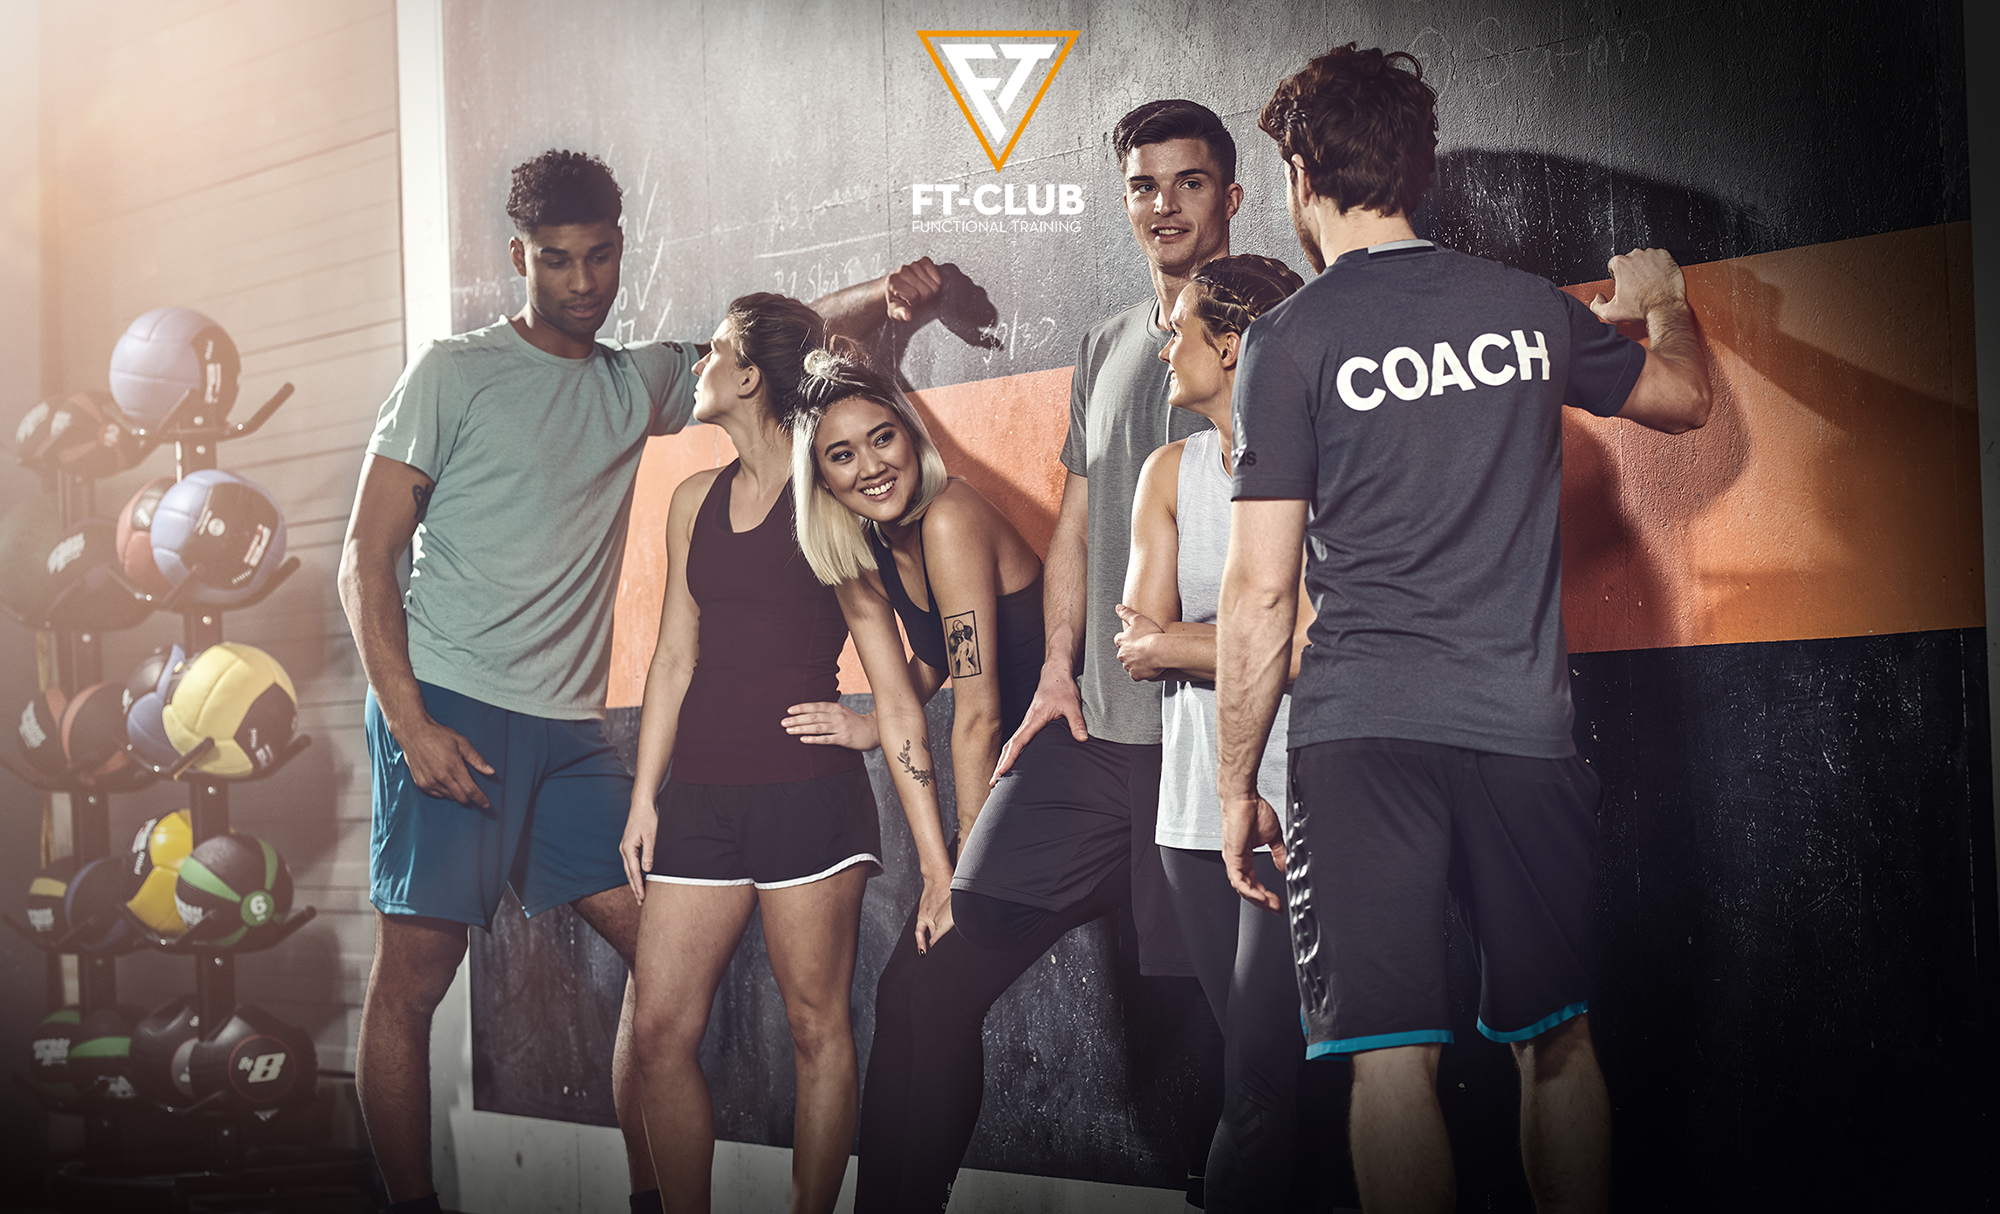 Der FT Club | Functional Training in ...